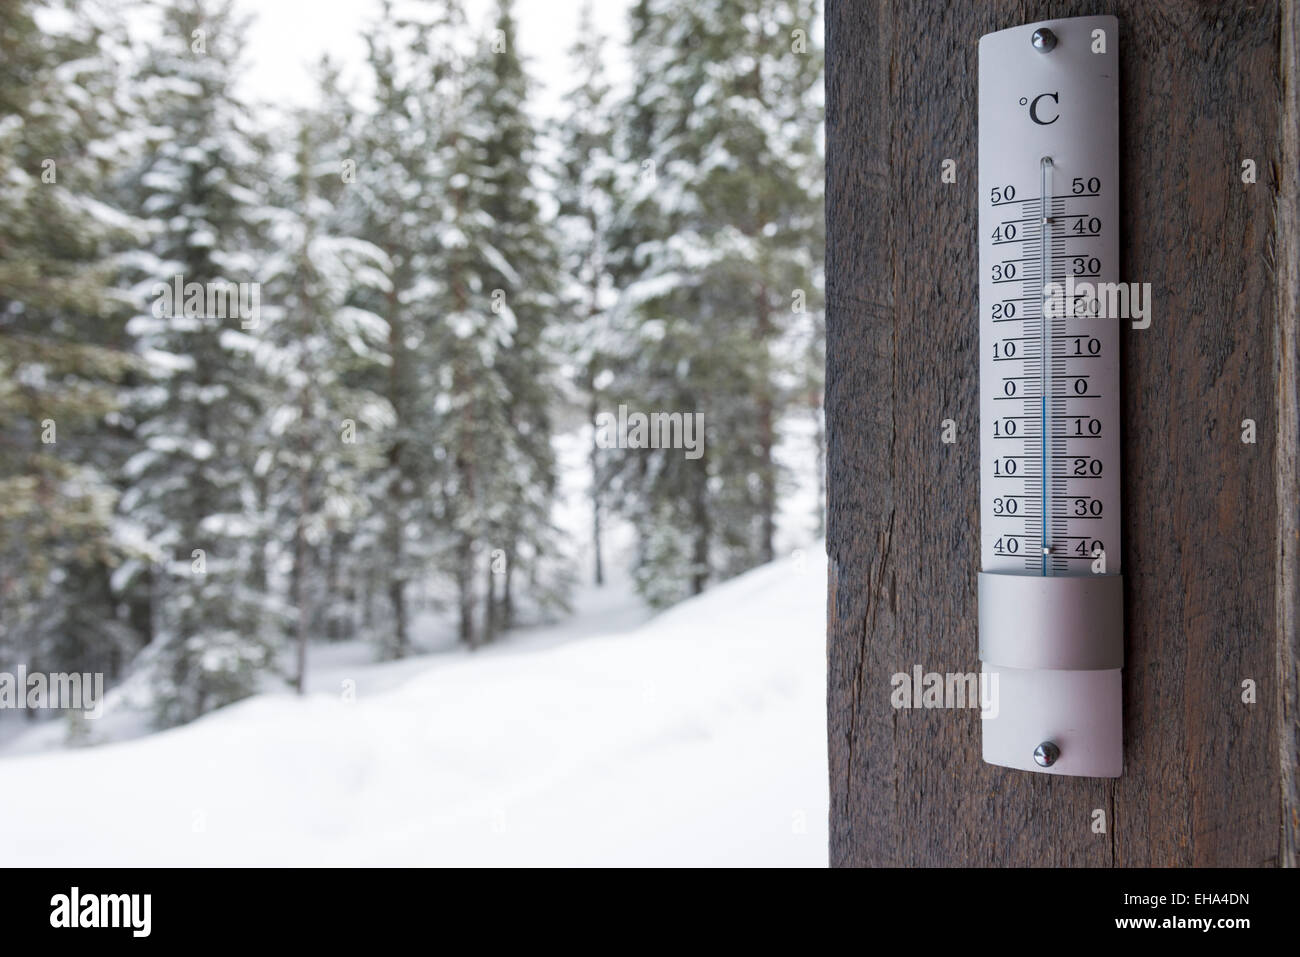 https://c8.alamy.com/comp/EHA4DN/a-close-up-of-a-thermometer-showing-zero-degrees-centigrade-with-a-EHA4DN.jpg